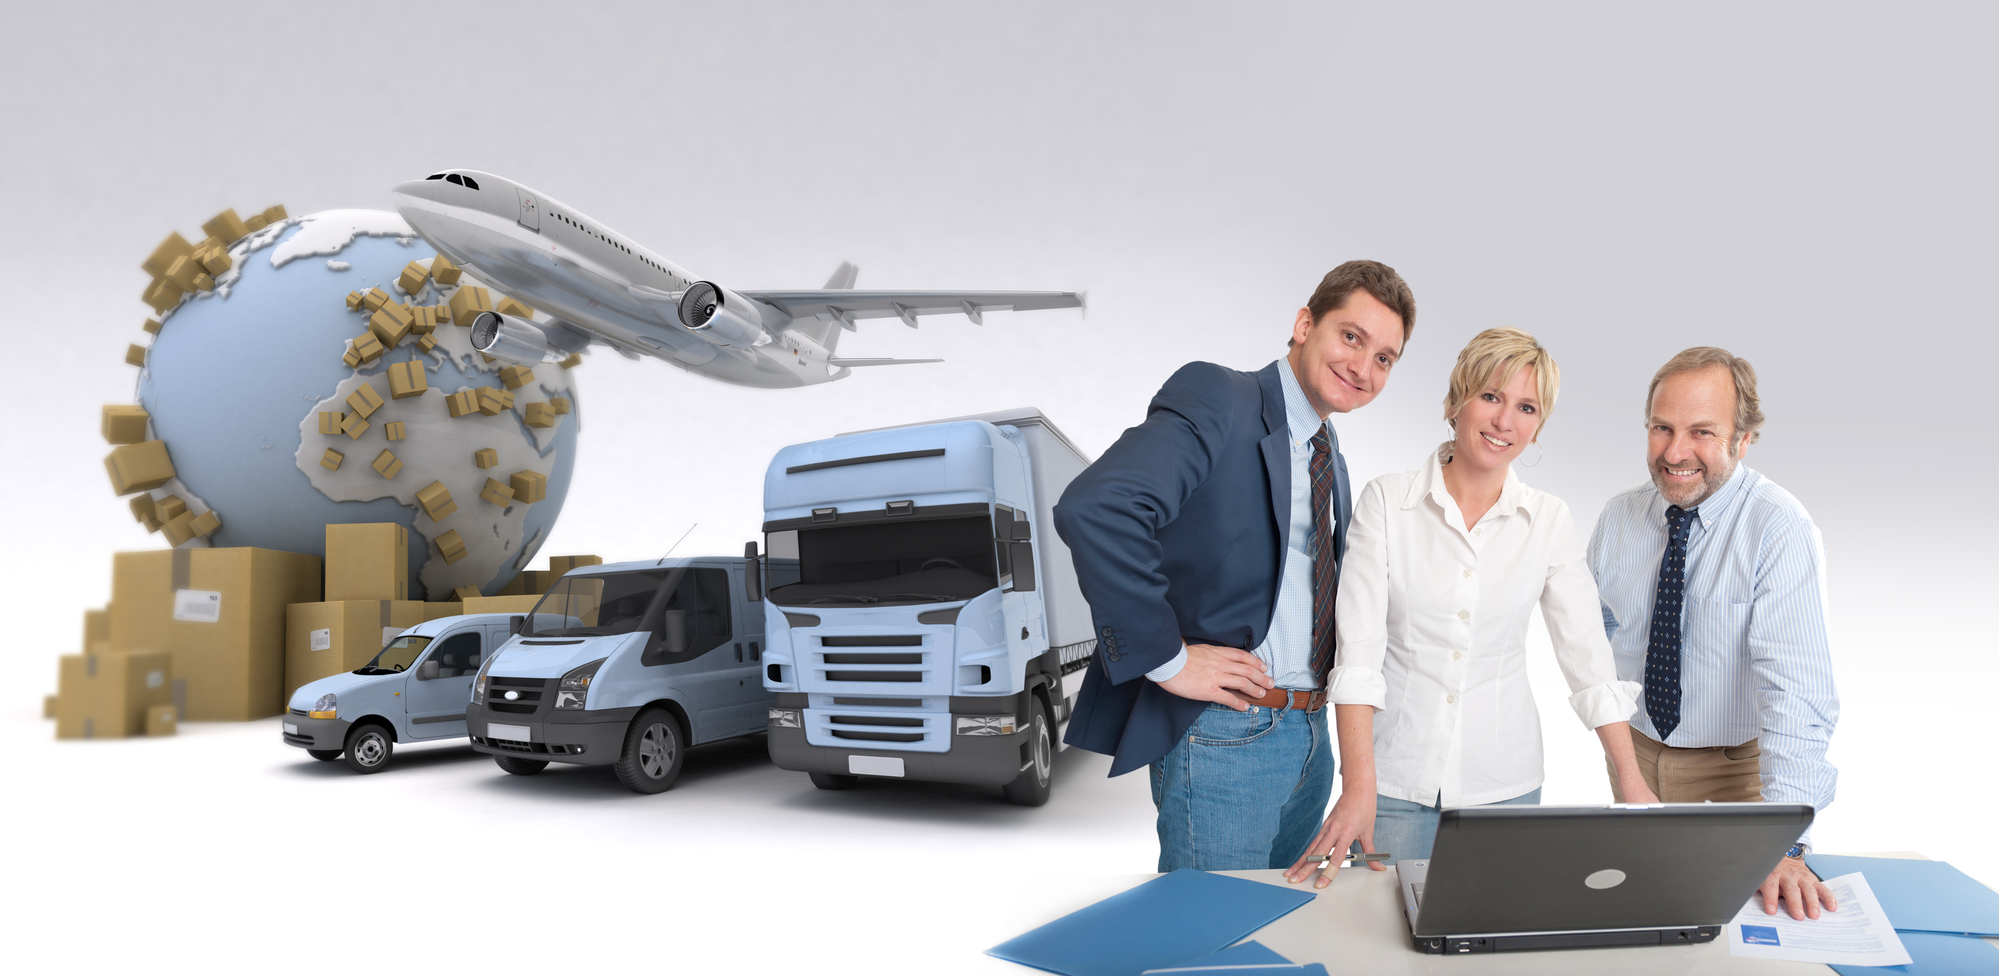 How to Choose a Freight Forwarder